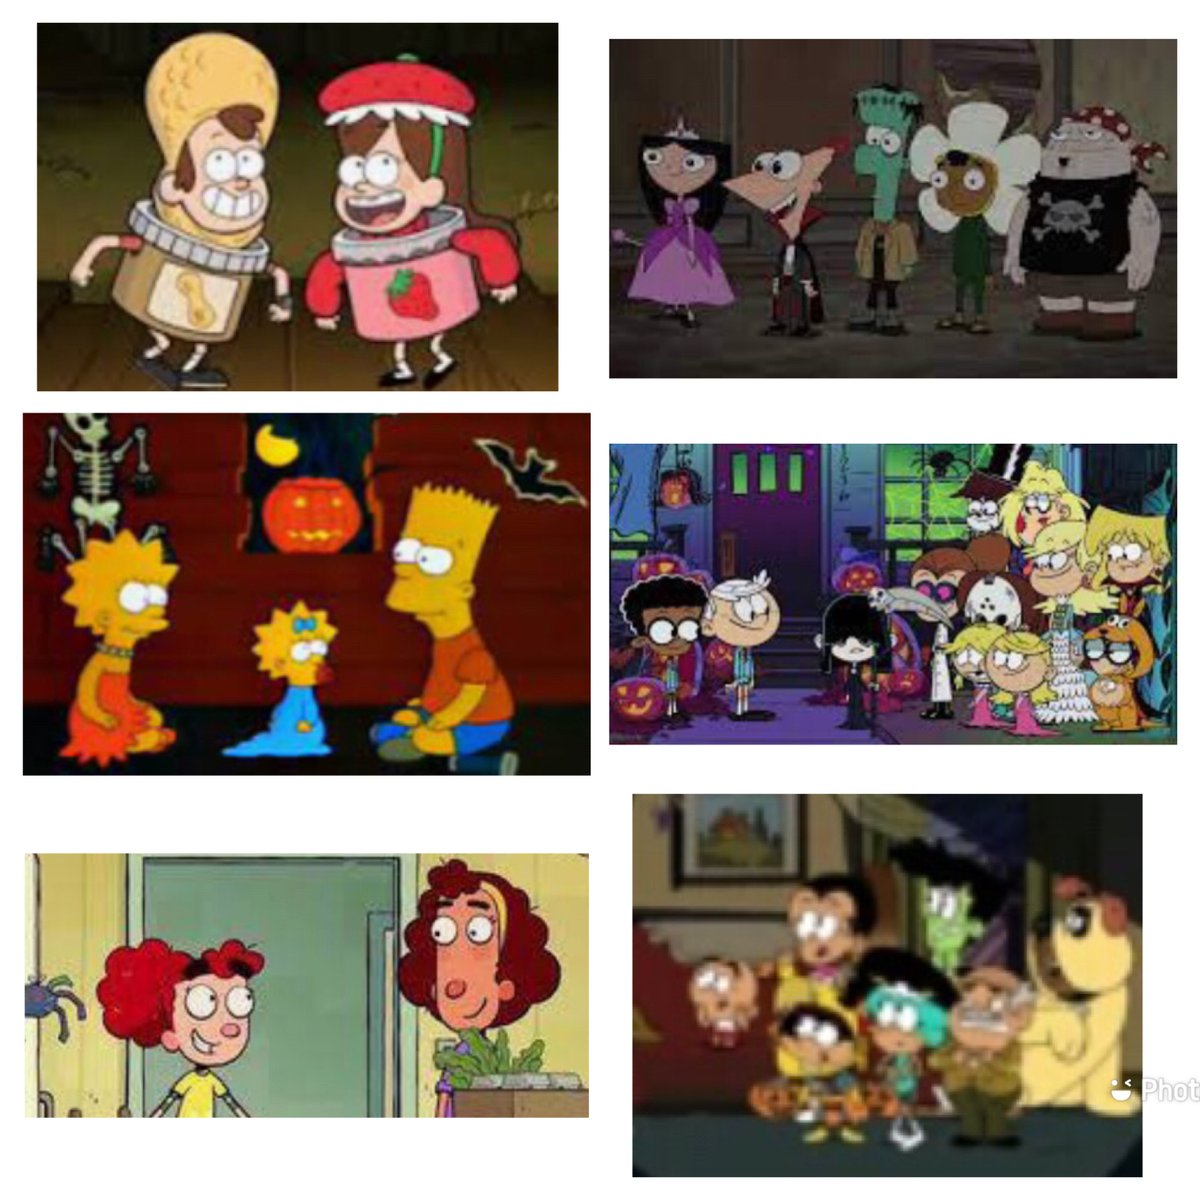 Happy Halloween 🎃 with #gravityfalls,#phineasandferb, #thecasagrandes, #itspony, #theloudhouse and #thesimpsons. #happyhalloween #halloween #halloweenseason